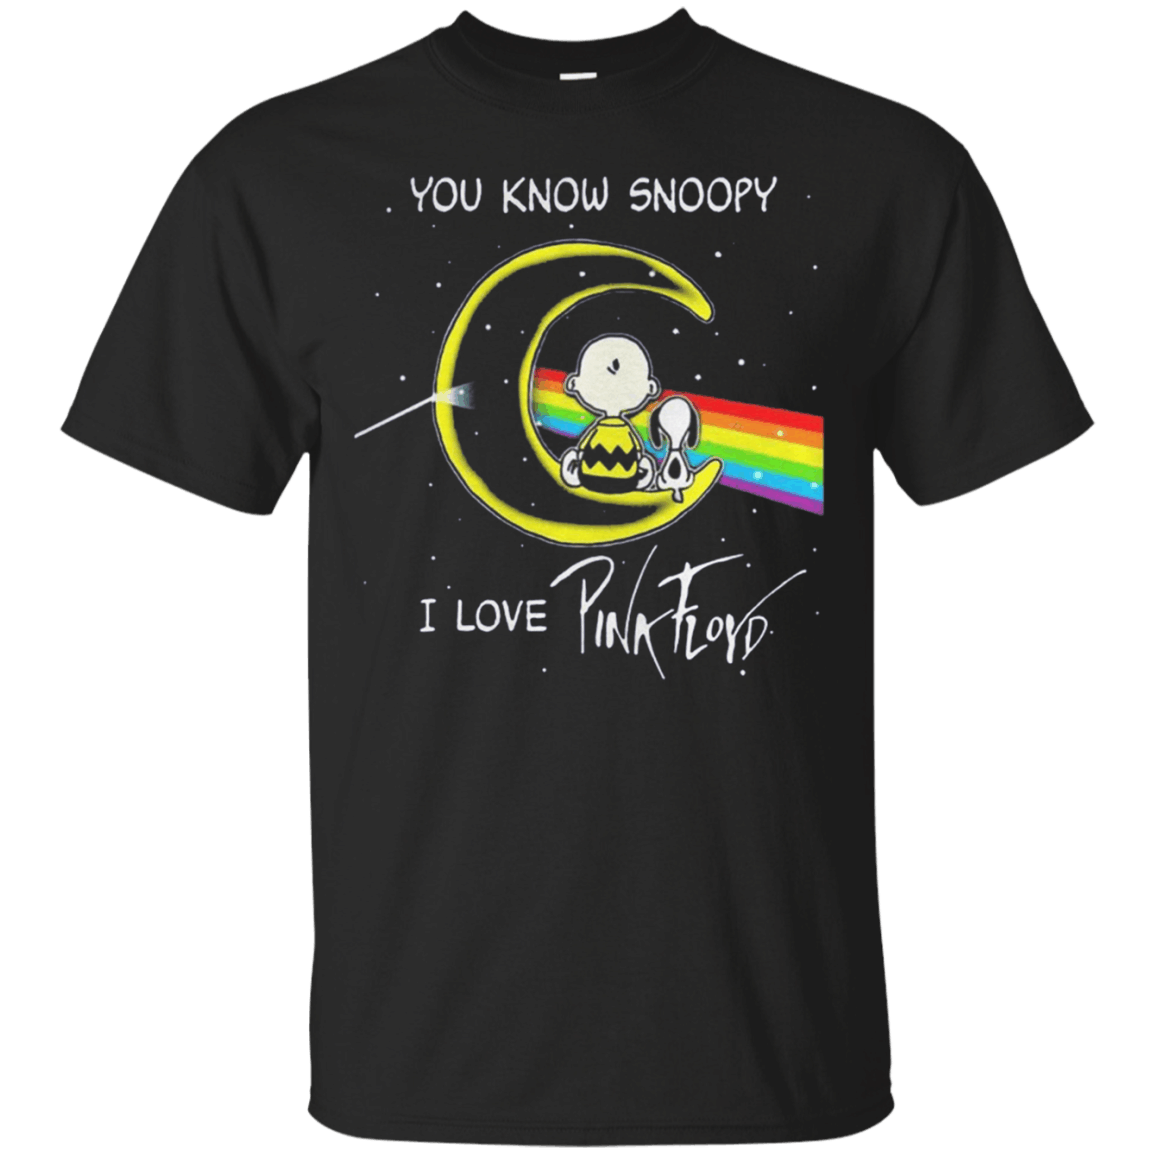 You know Snoopy I love Pink Floyd dark side the moon T shirt - Love Art USA